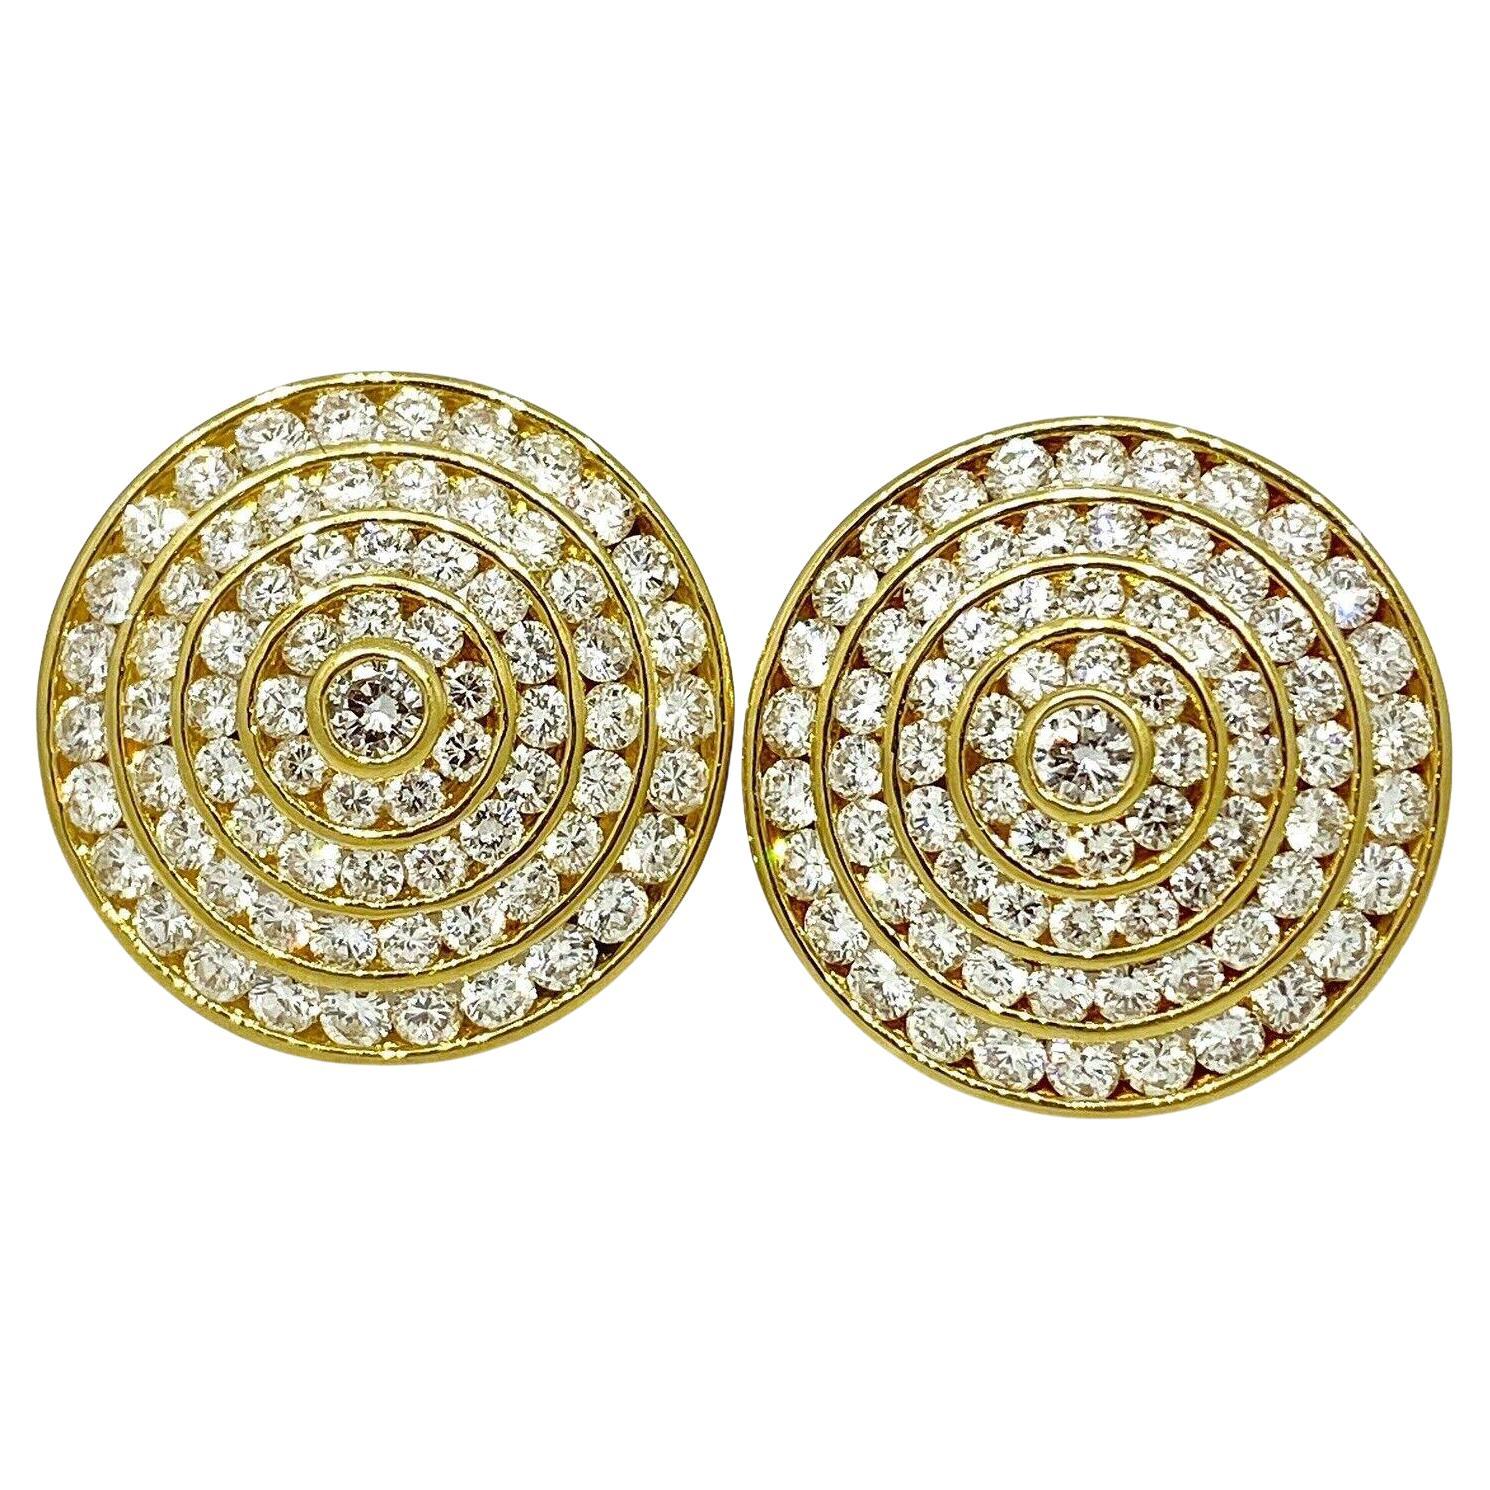 4 Row Circle Diamond Earrings 3.95 carat total weight in 18k Yellow Gold For Sale